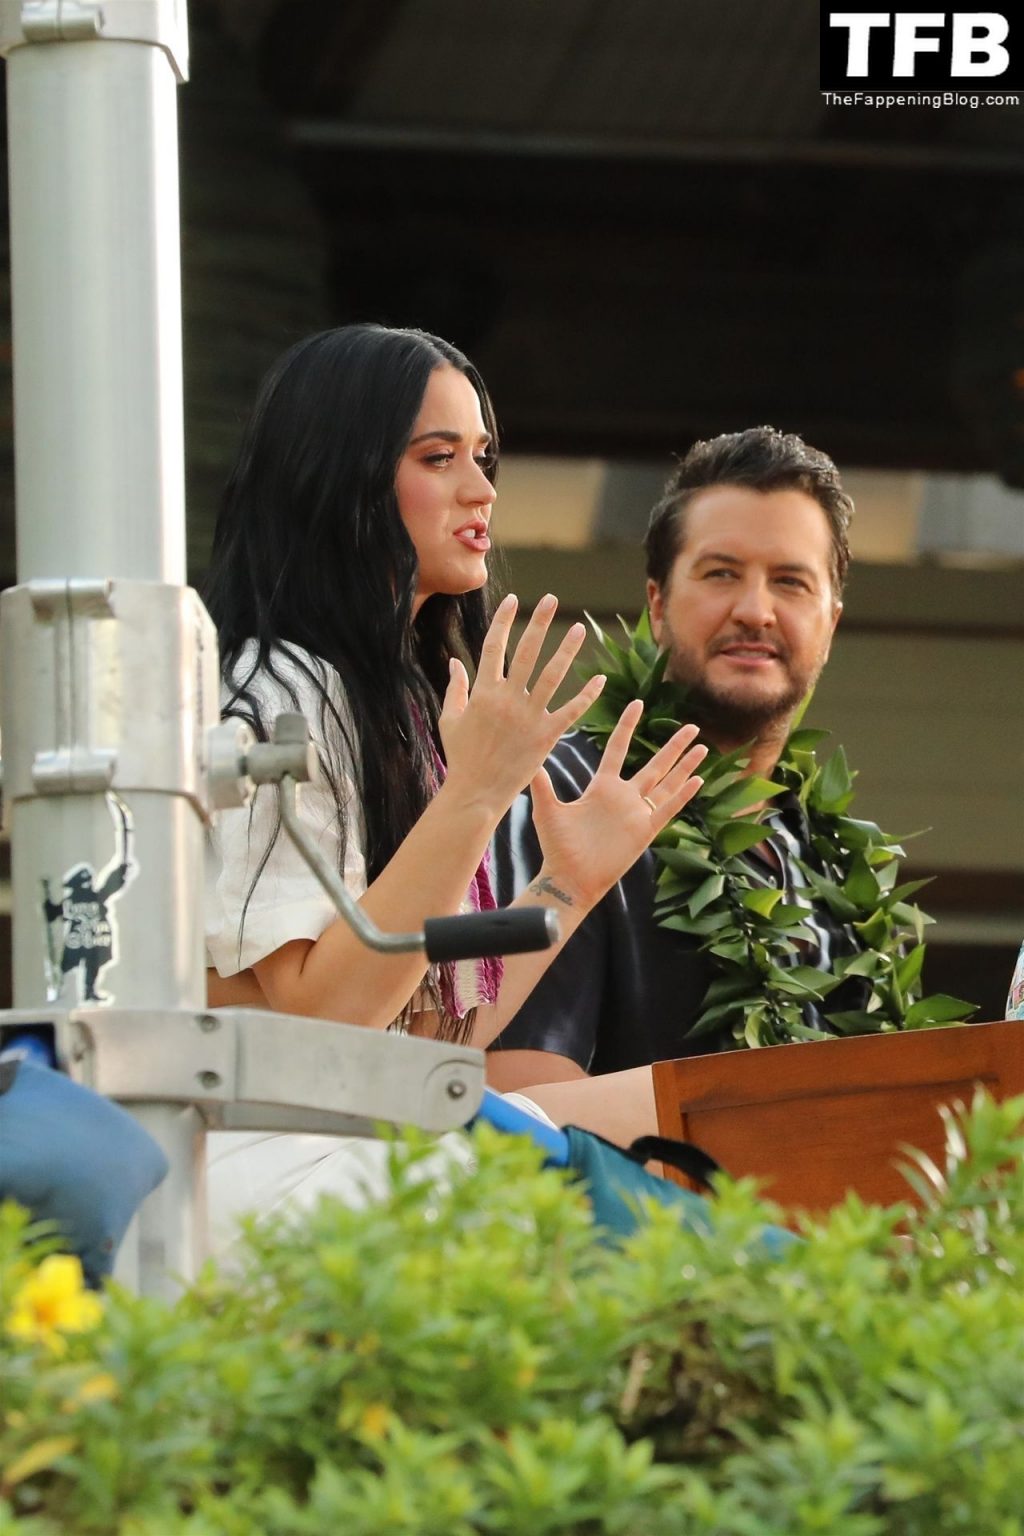 Katy Perry Tits The Fappening Blog 6 1024x1536 - Katy Perry Shows Her Underboob Filming a New Season of American Idol in Maui (70 Photos)